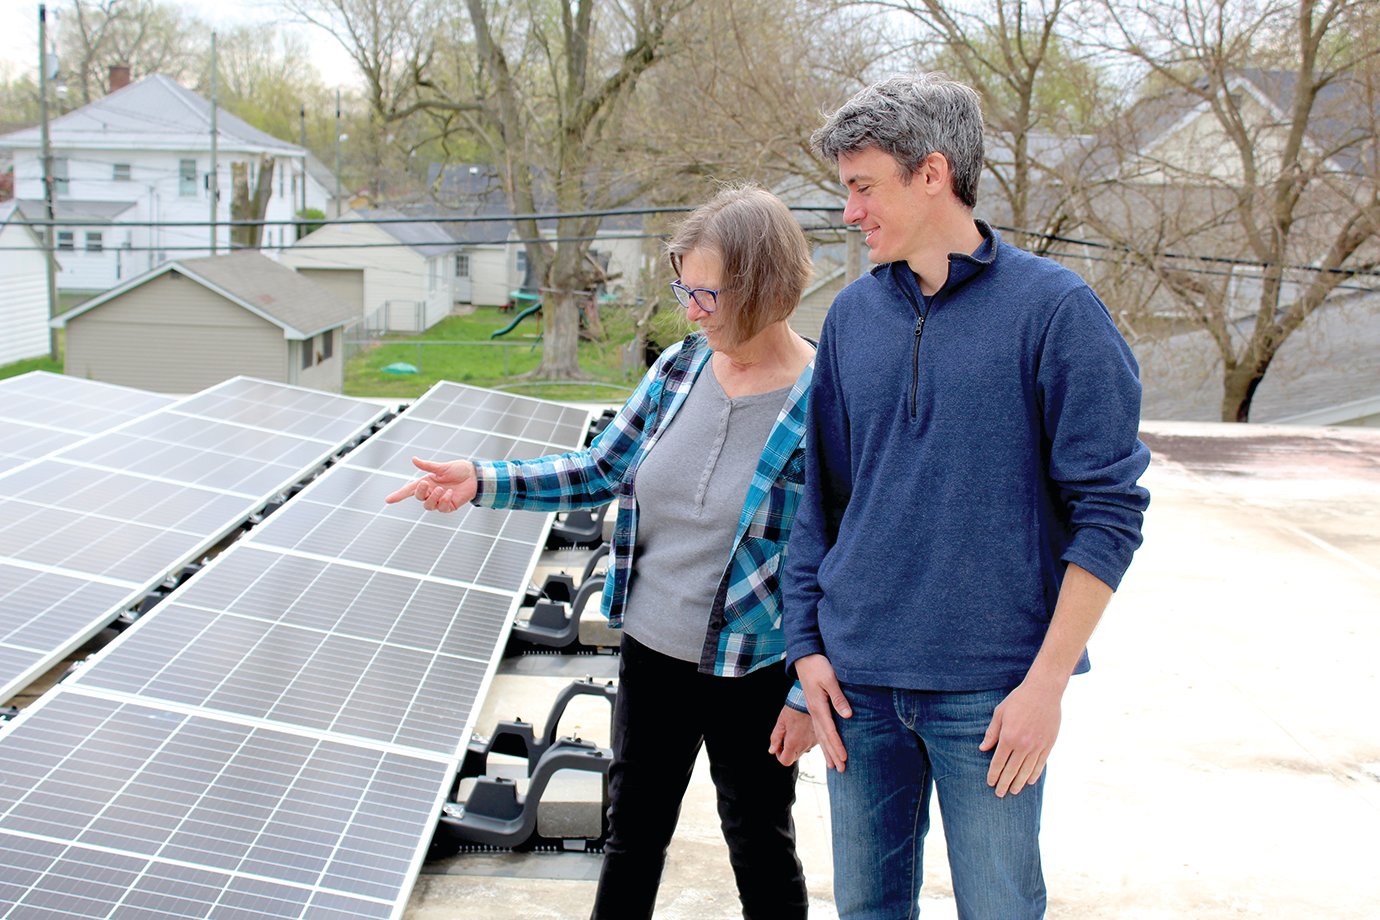 League of Women Voters Climate Team members Helen Hudson and John Smillie run a check on the newly installed solar panel system on the roof of the Youth Service Bureau.